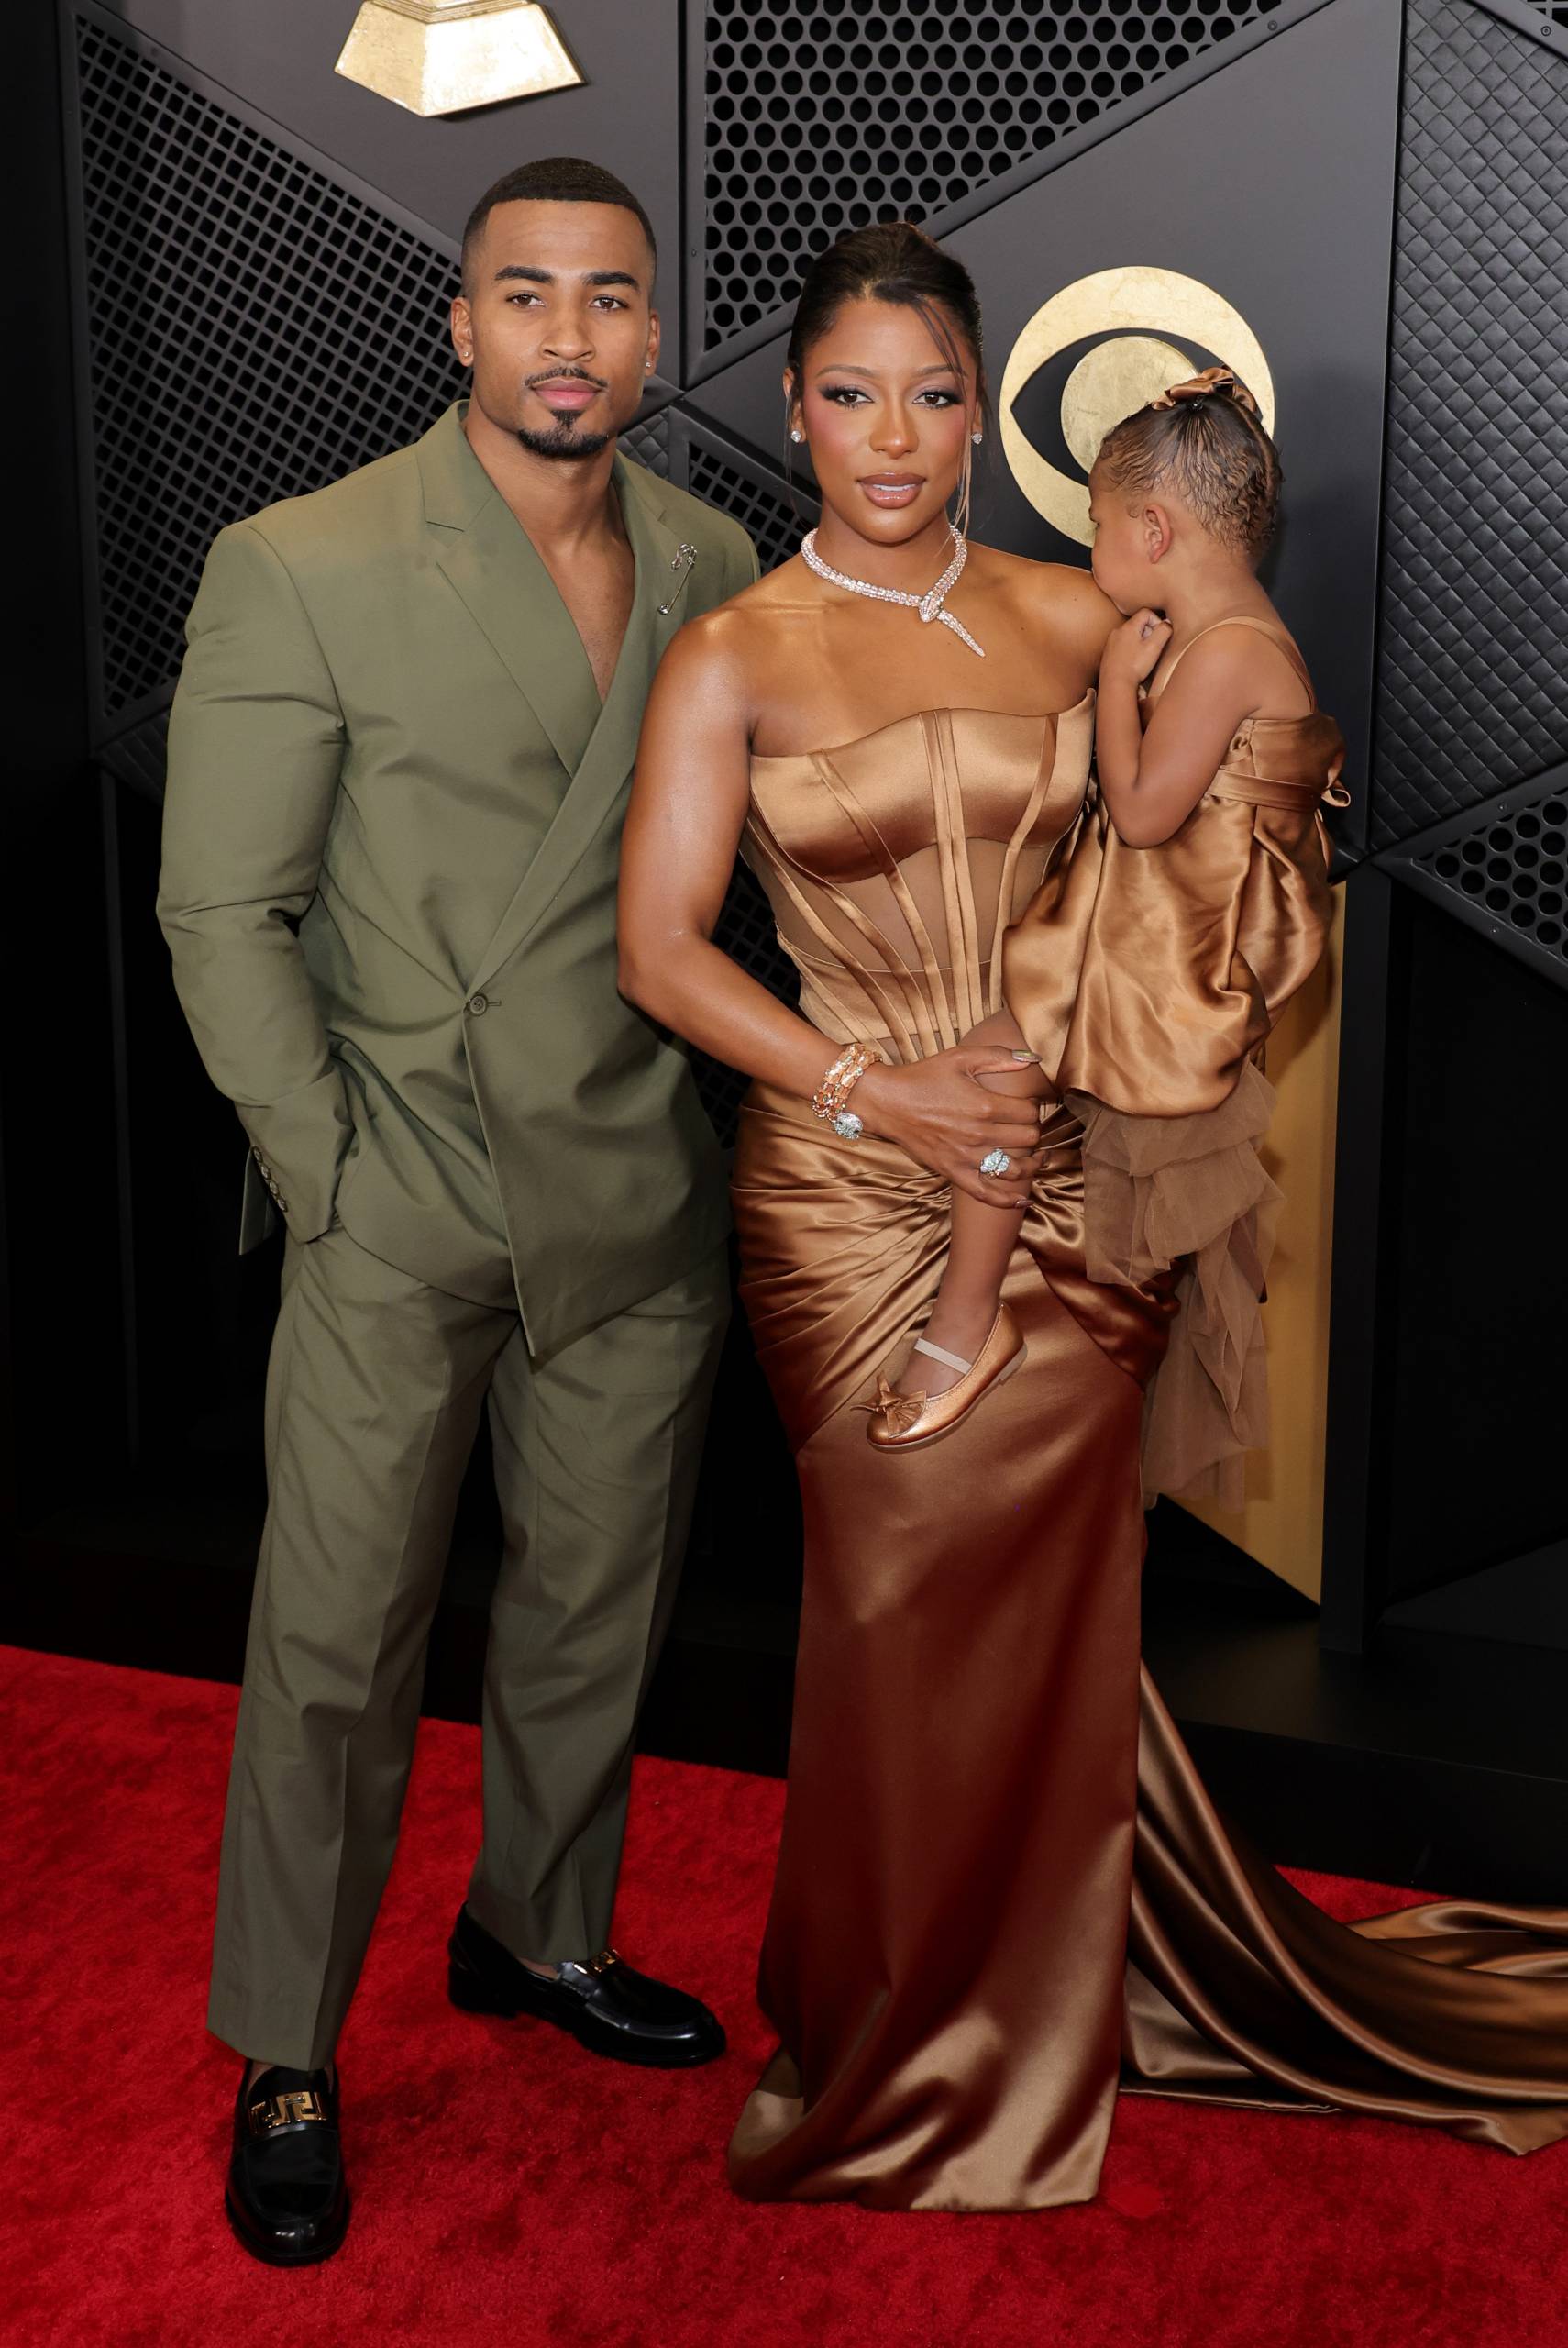 A Black man in a green suit and a Black woman in a tight rose gold gown stand on the red carpet. The woman is holding a small child.